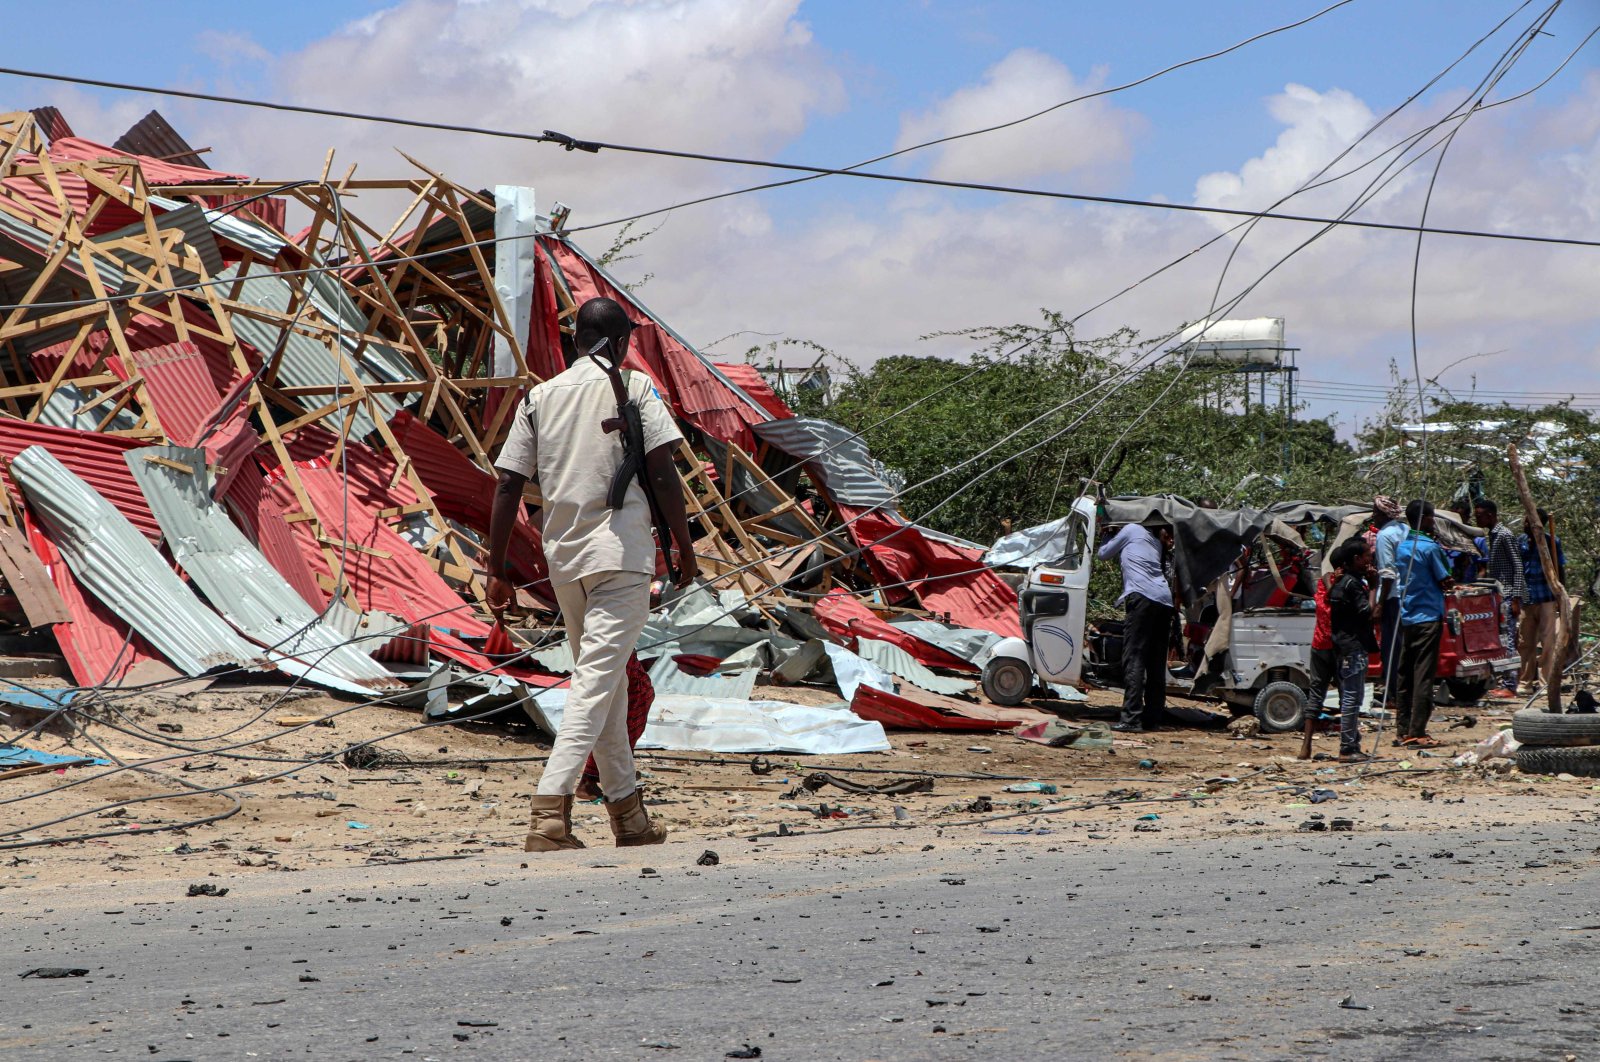 A Somali police officer patrols (L) as bystanders gather at the site of a suicide car bombing that targeted a European Union vehicle convoy in Mogadishu, Somalia, Sept. 30, 2019. (AFP Photo)